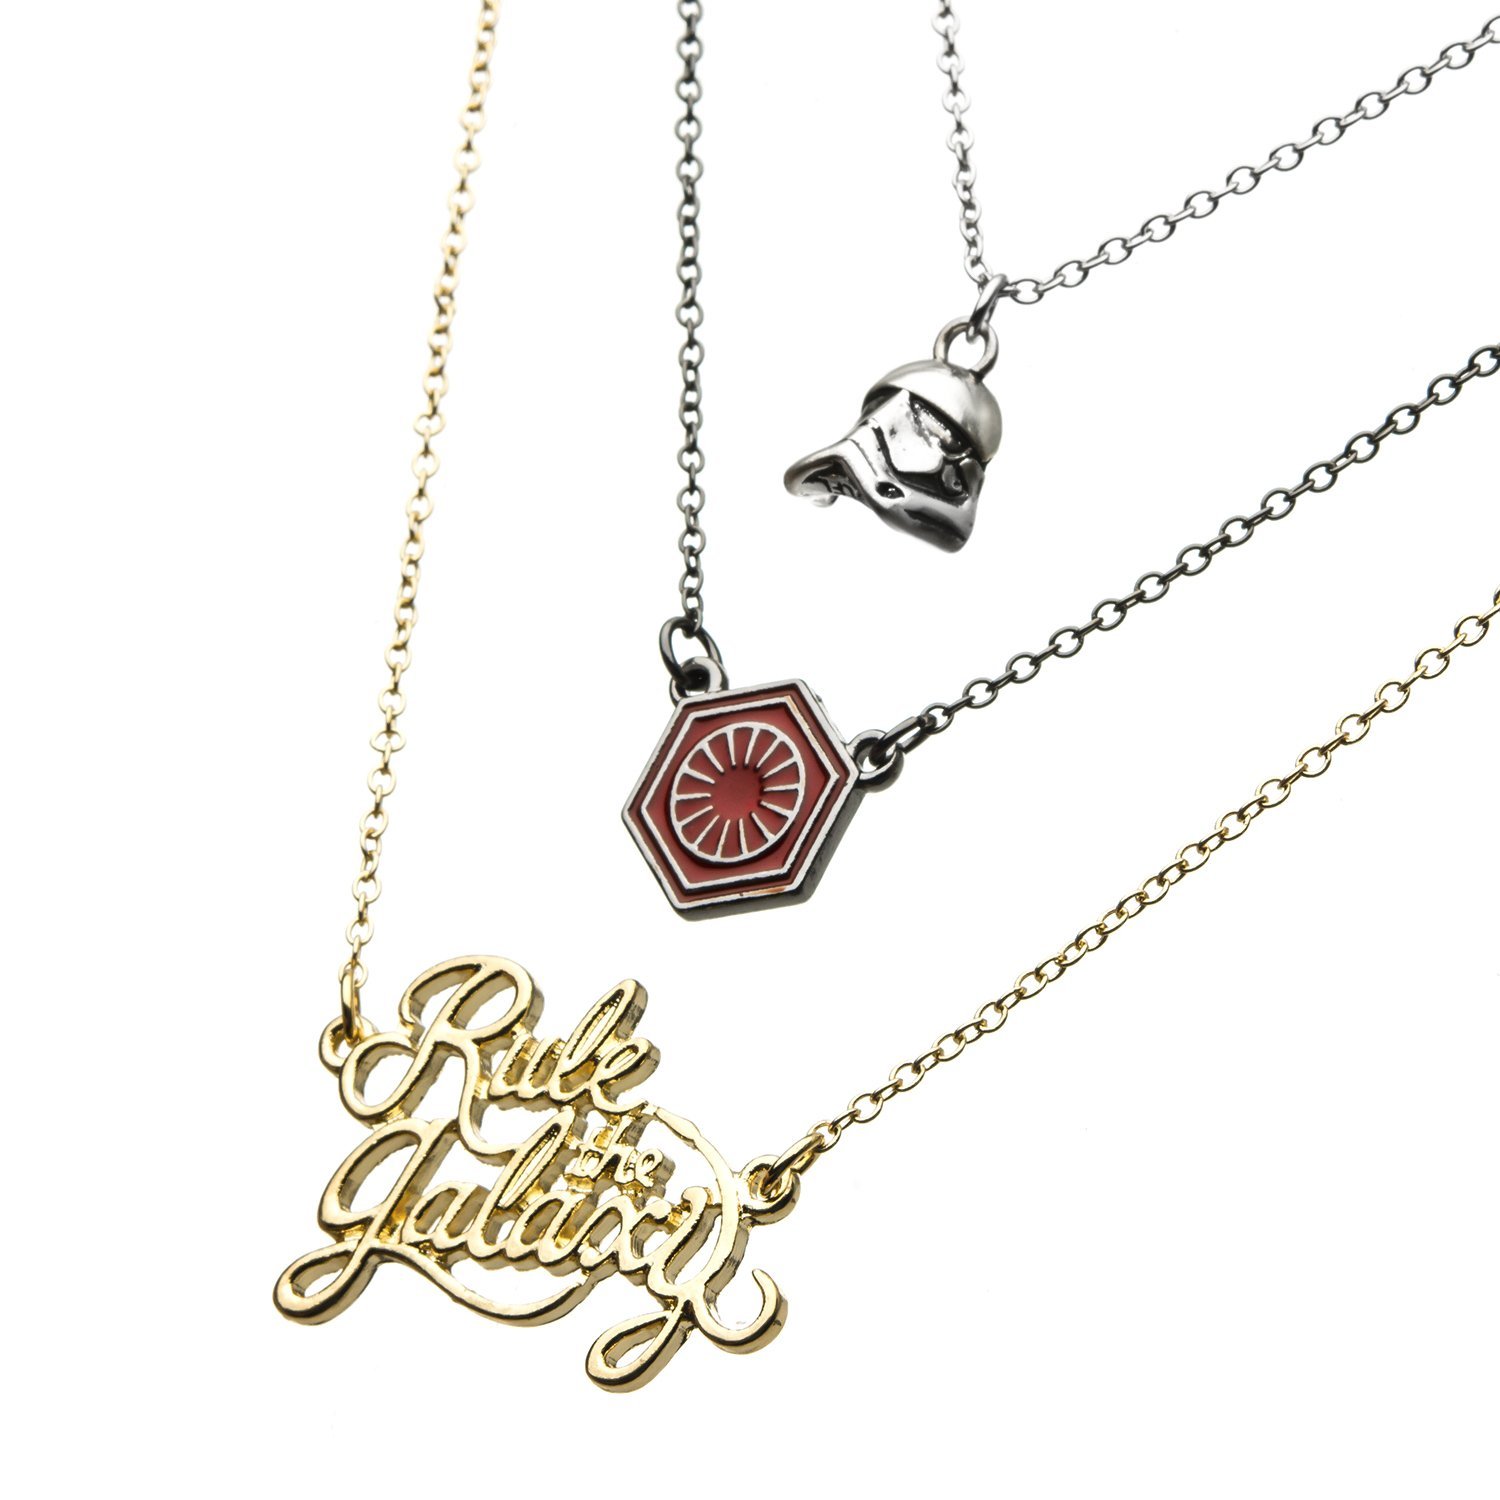 Star Wars First Order Rule The Galaxy Tiered Necklace on Amazon